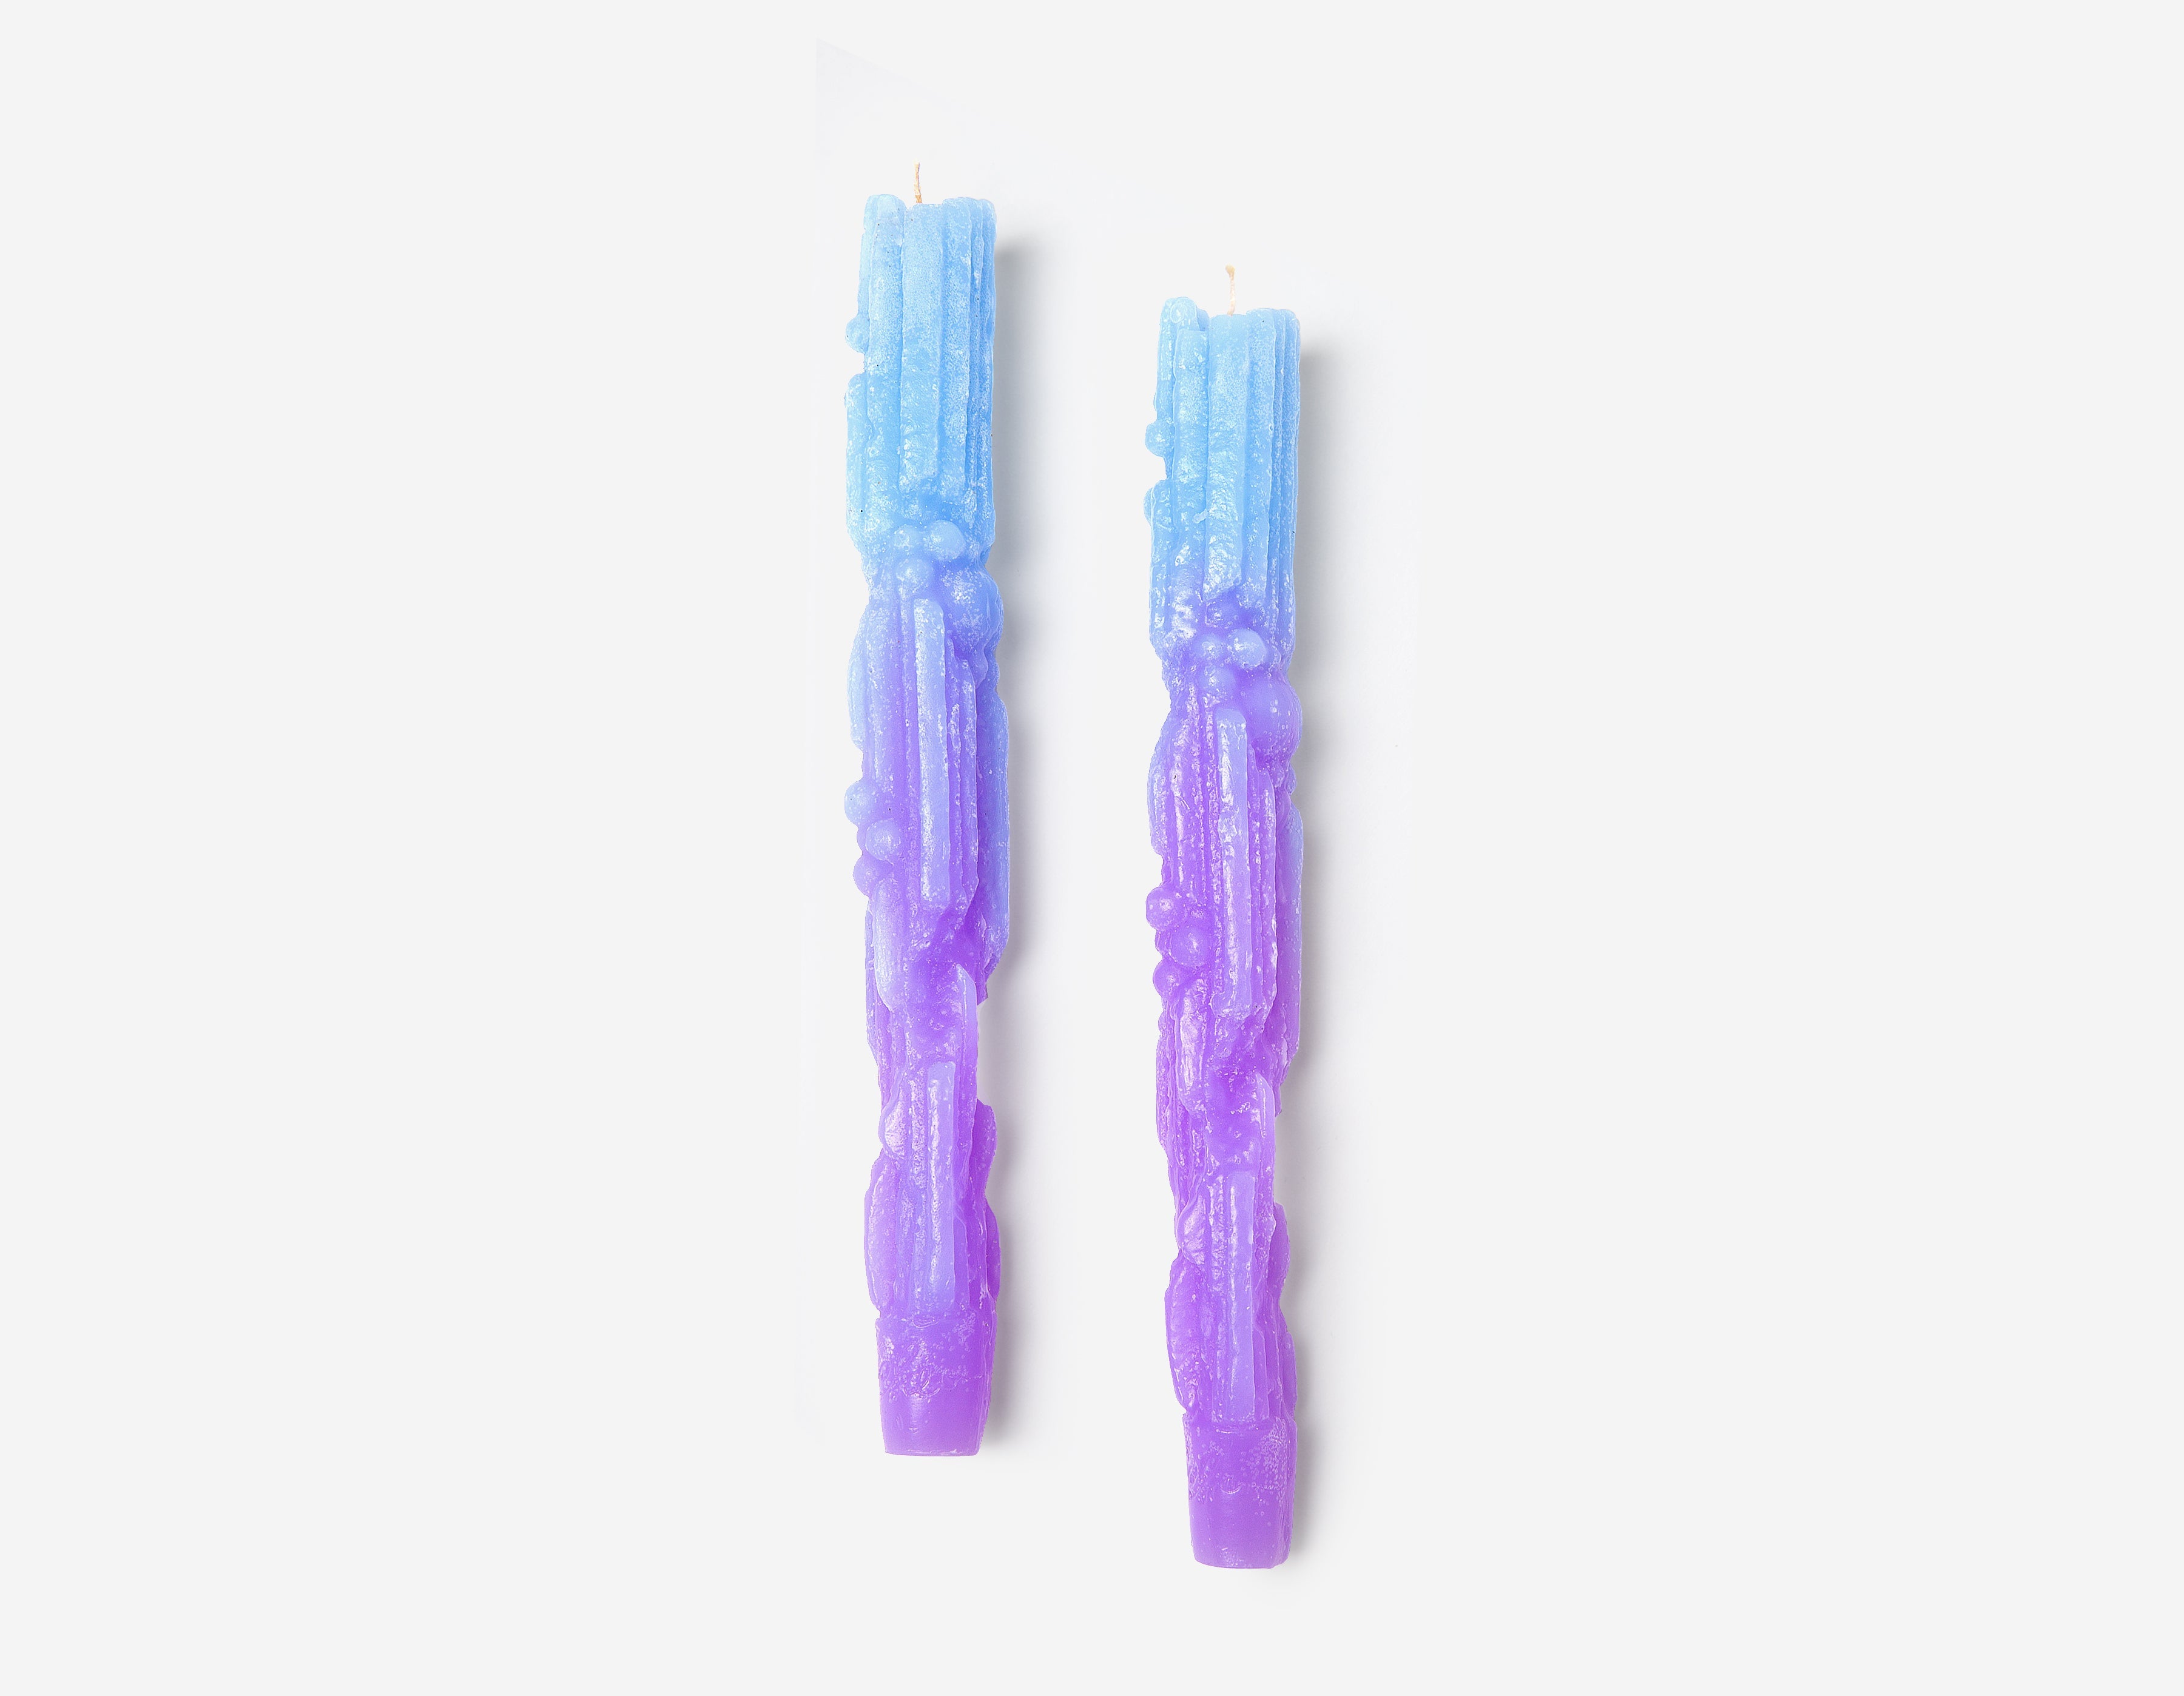 The Psychic Wand, Candle Stick Duo